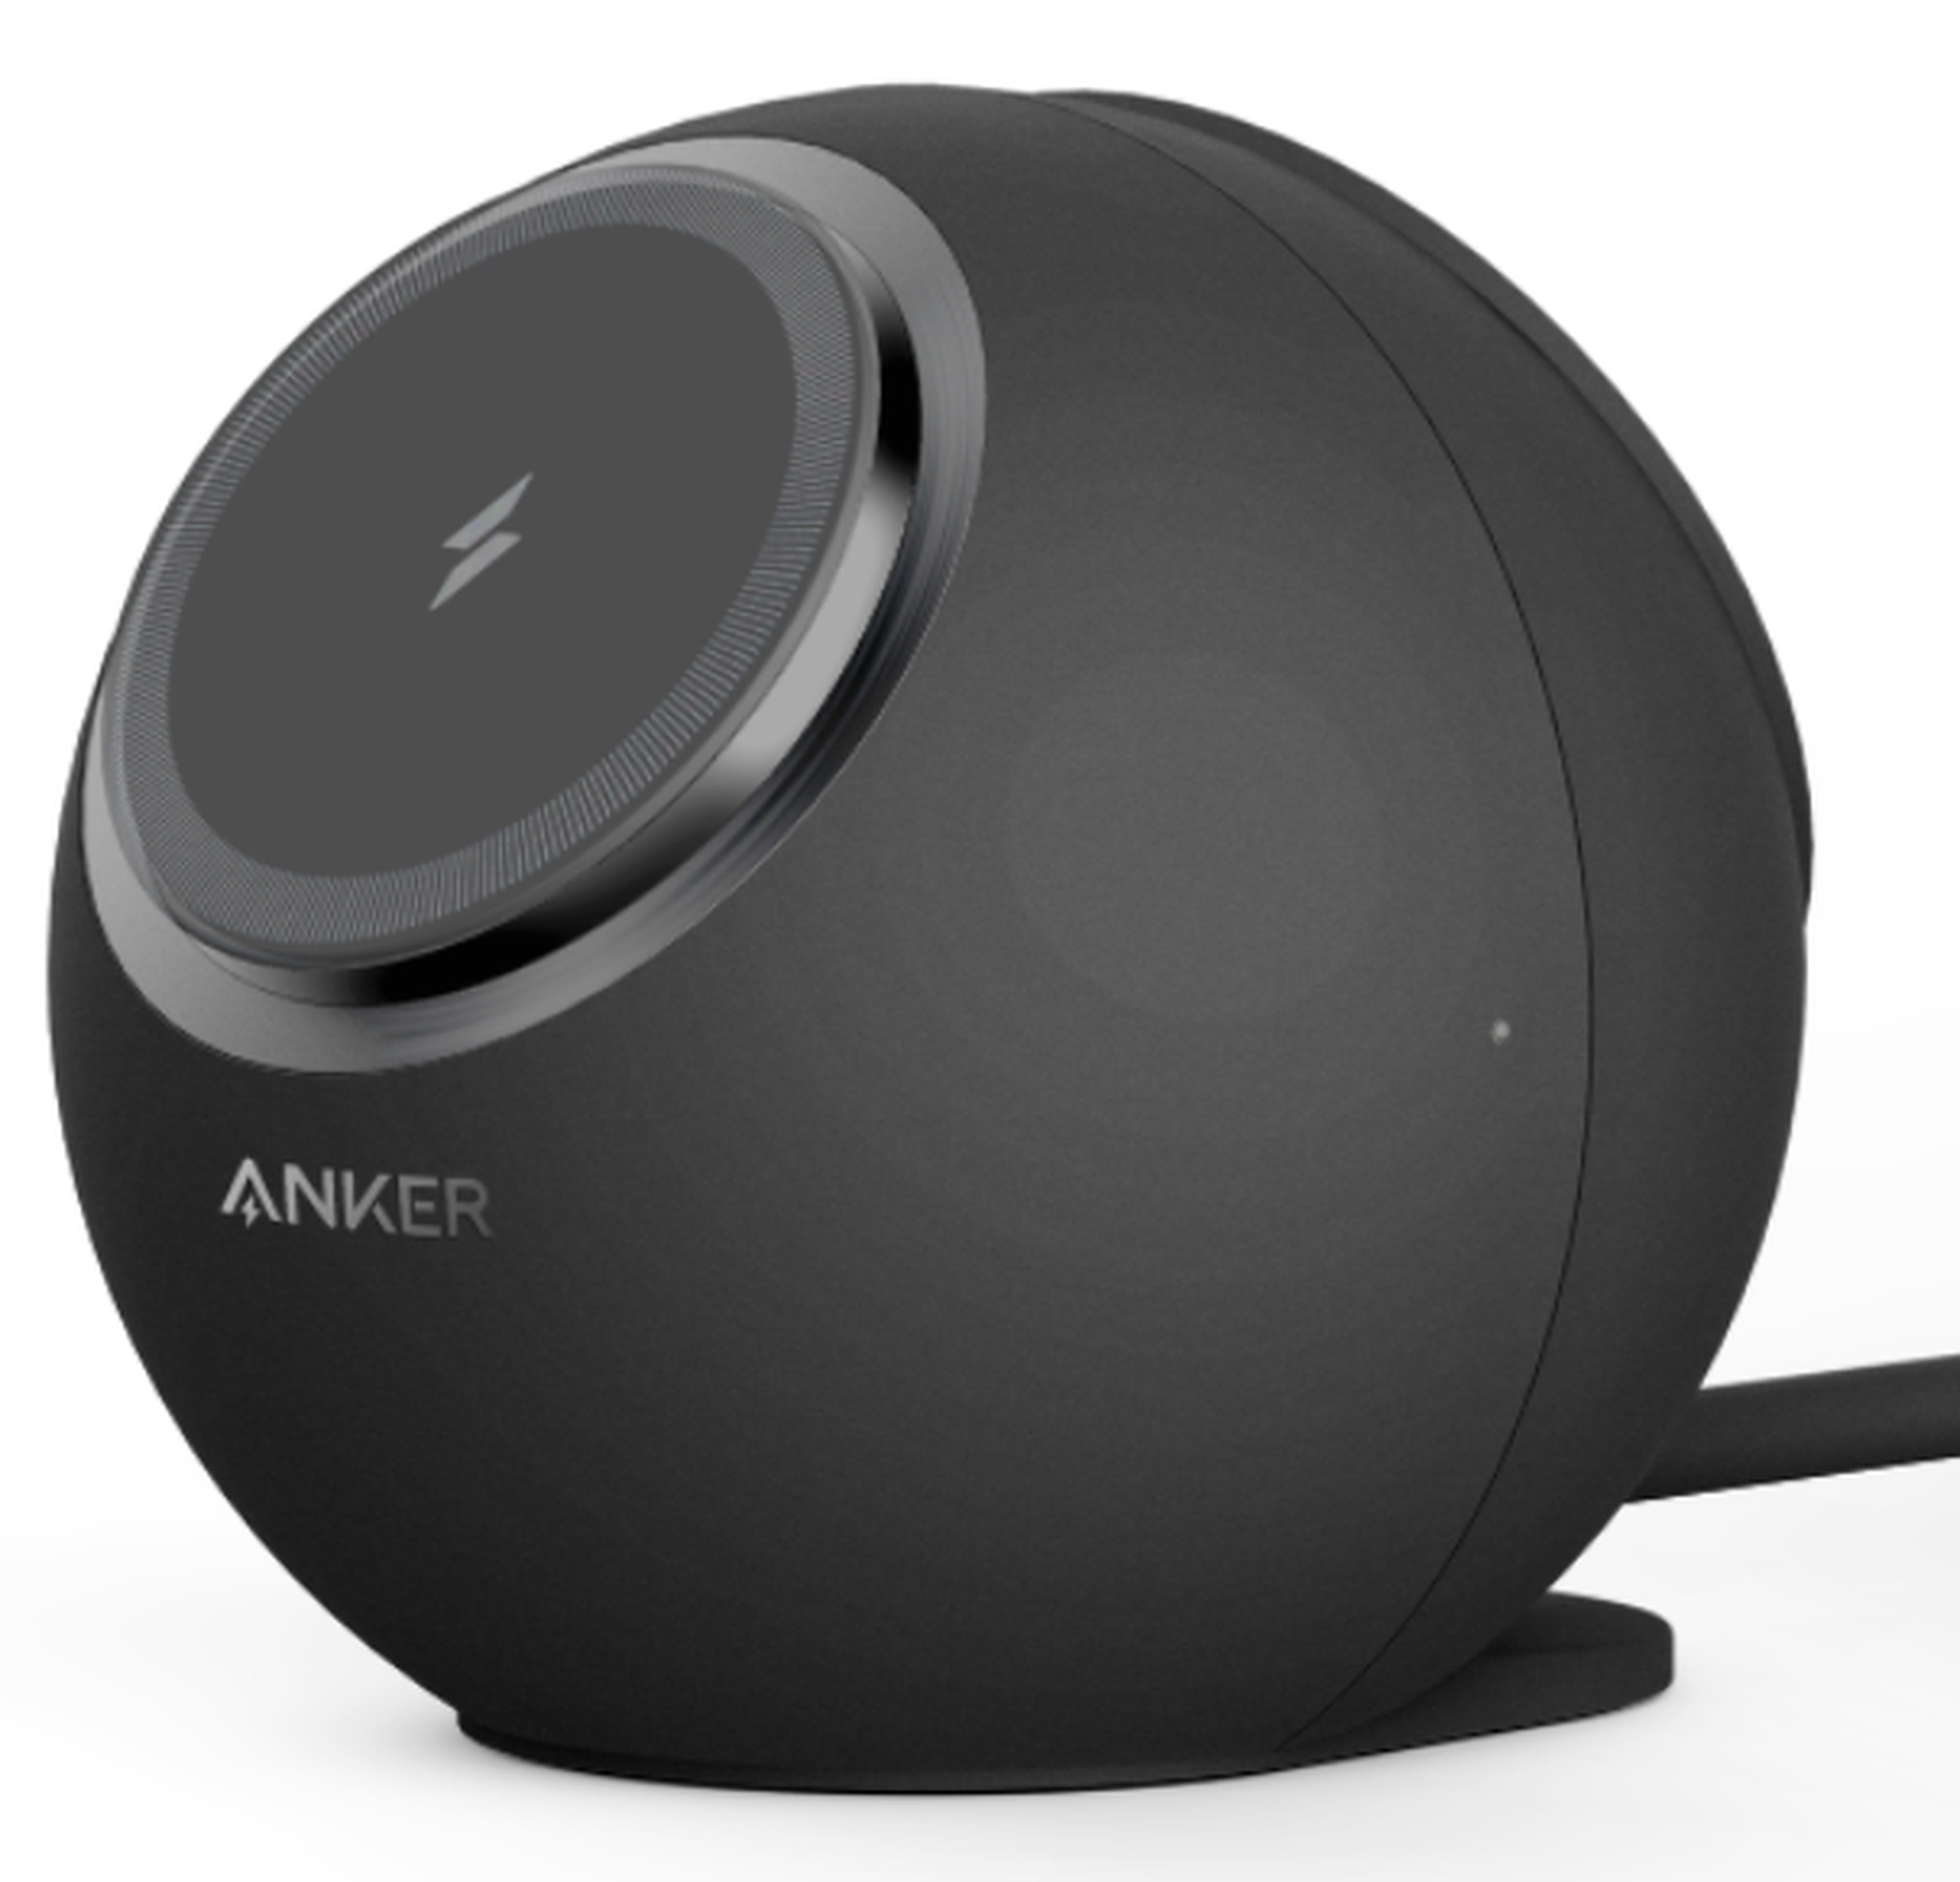 This Anker orb is one of the Qi2 chargers announced earlier this year. Sure is orb!